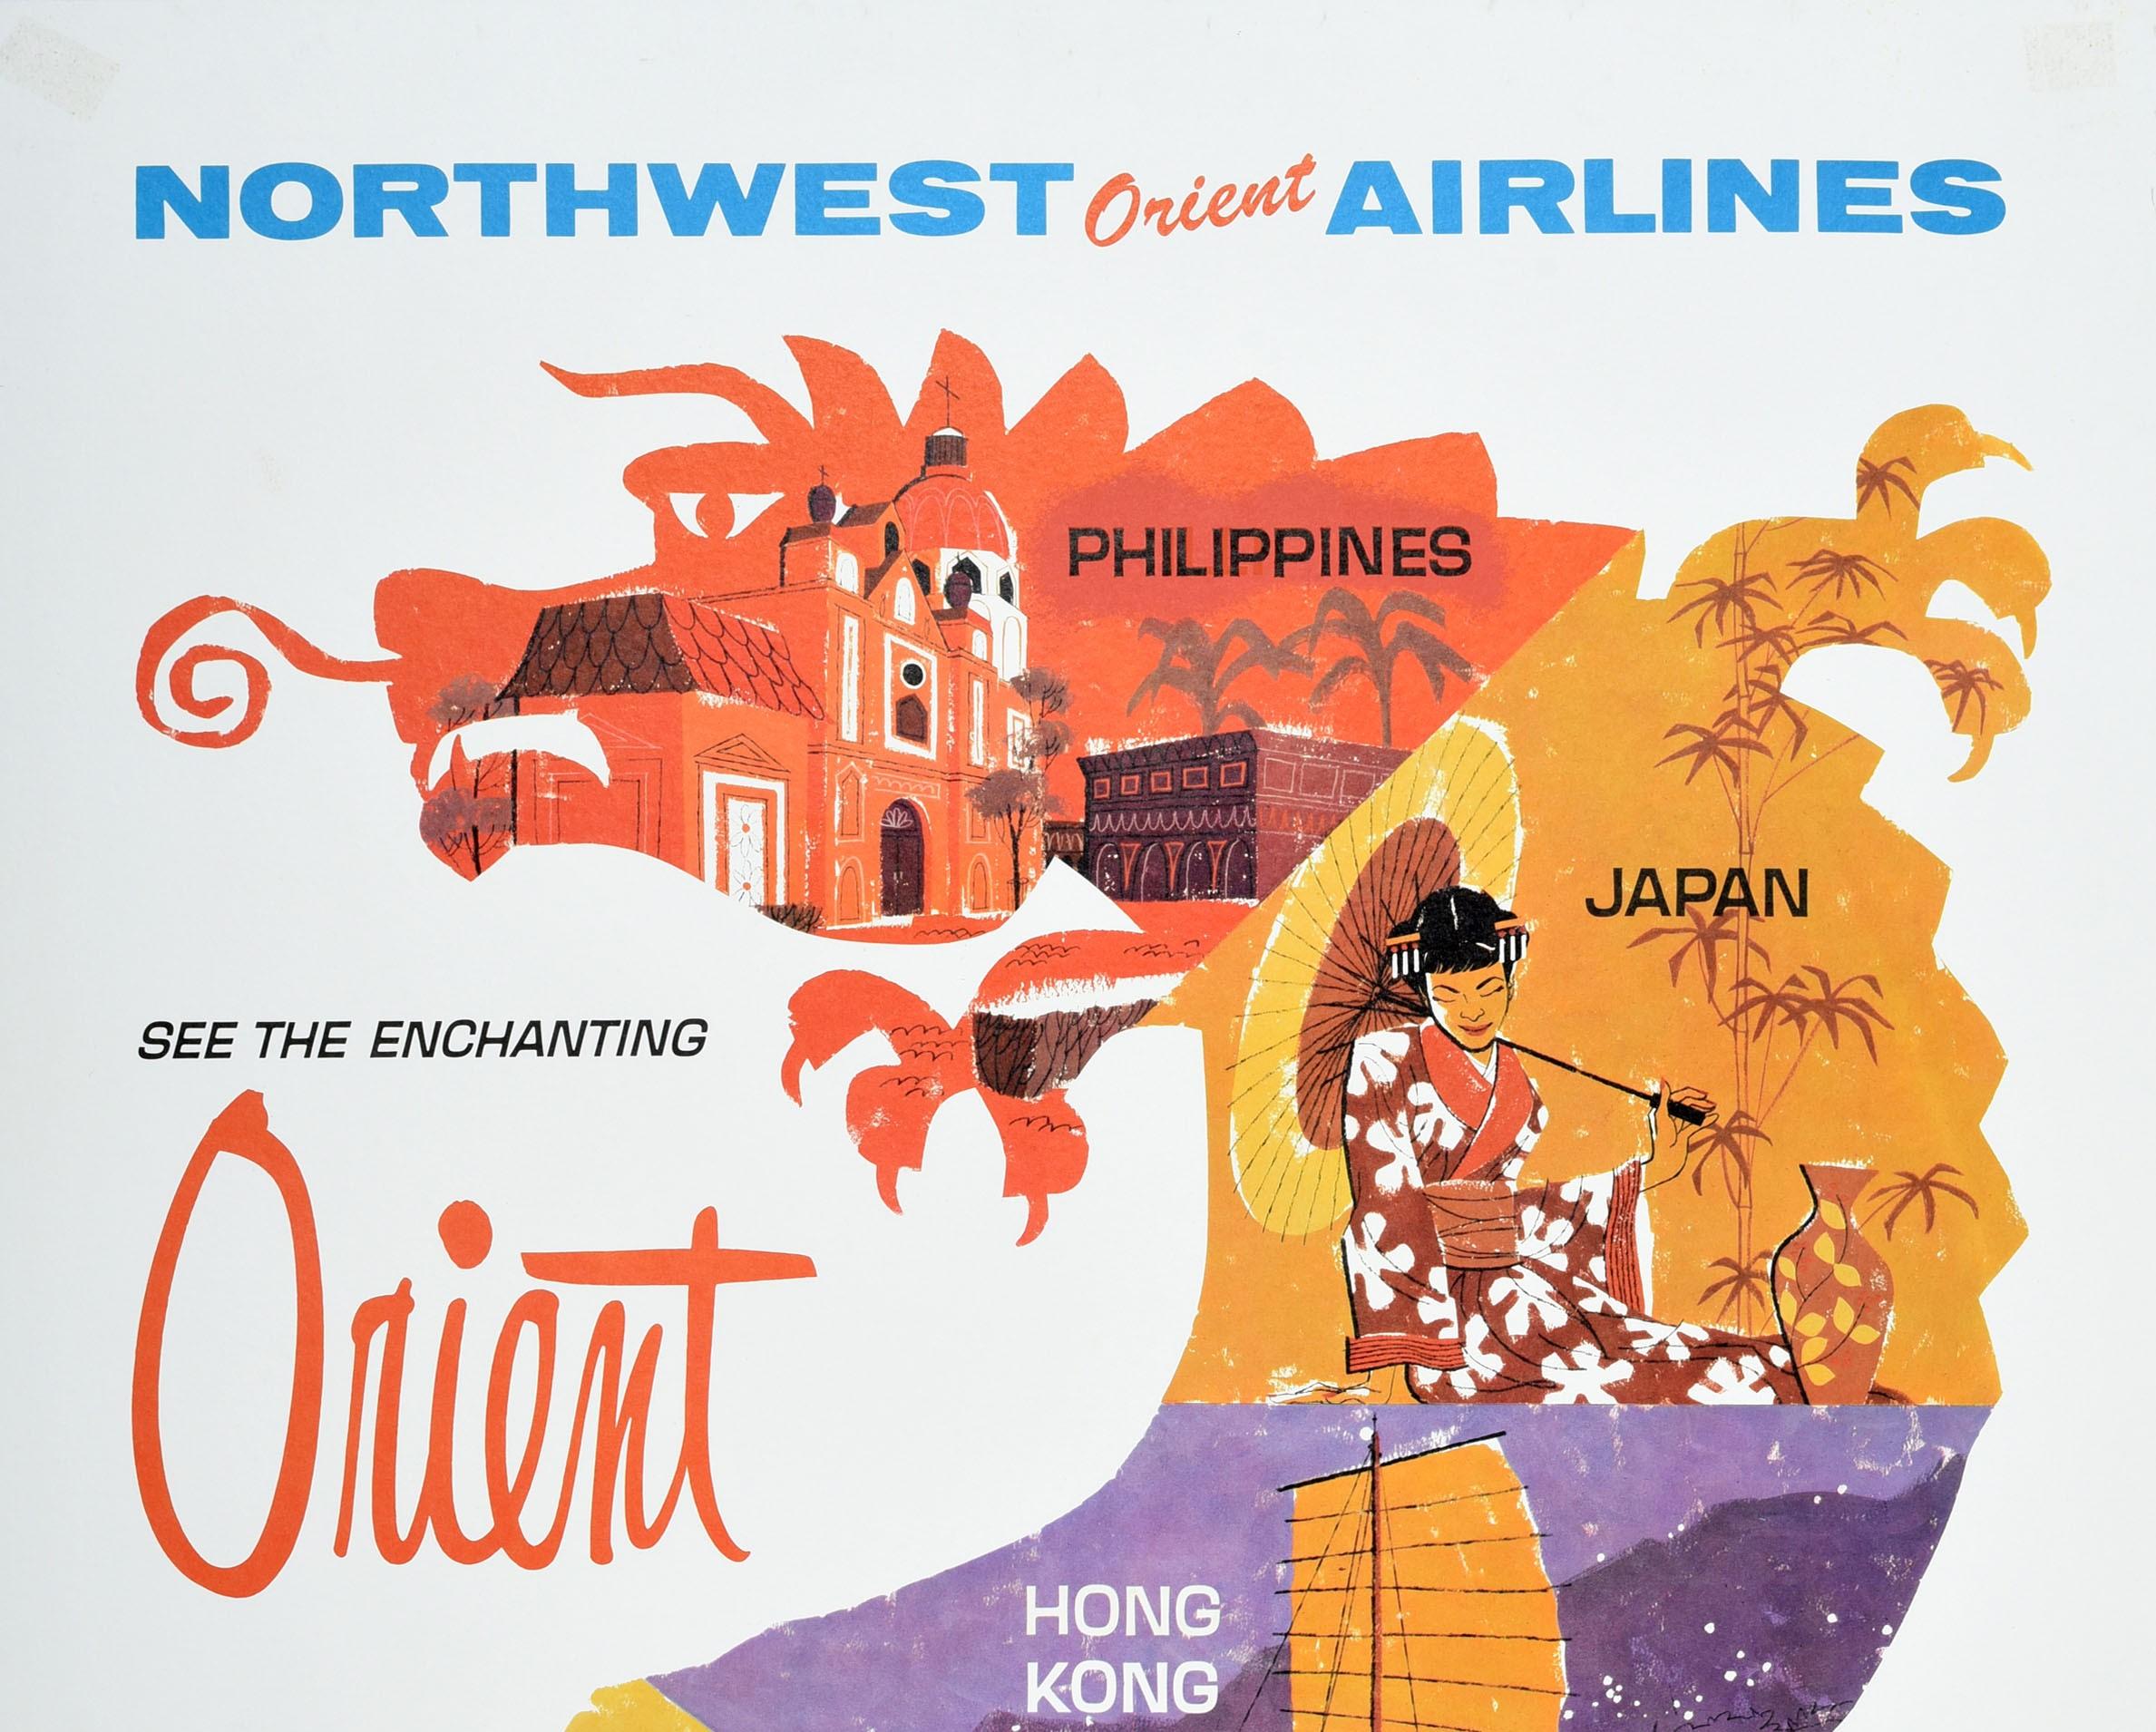 Original vintage travel advertising poster for Northwest Orient Airlines See The Enchanting Orient Philippines Japan Hong Kong Korea Taiwan DC8C-Jet Service Shortest, Fastest, Finest Way To The Orient. Colourful design featuring five images of the